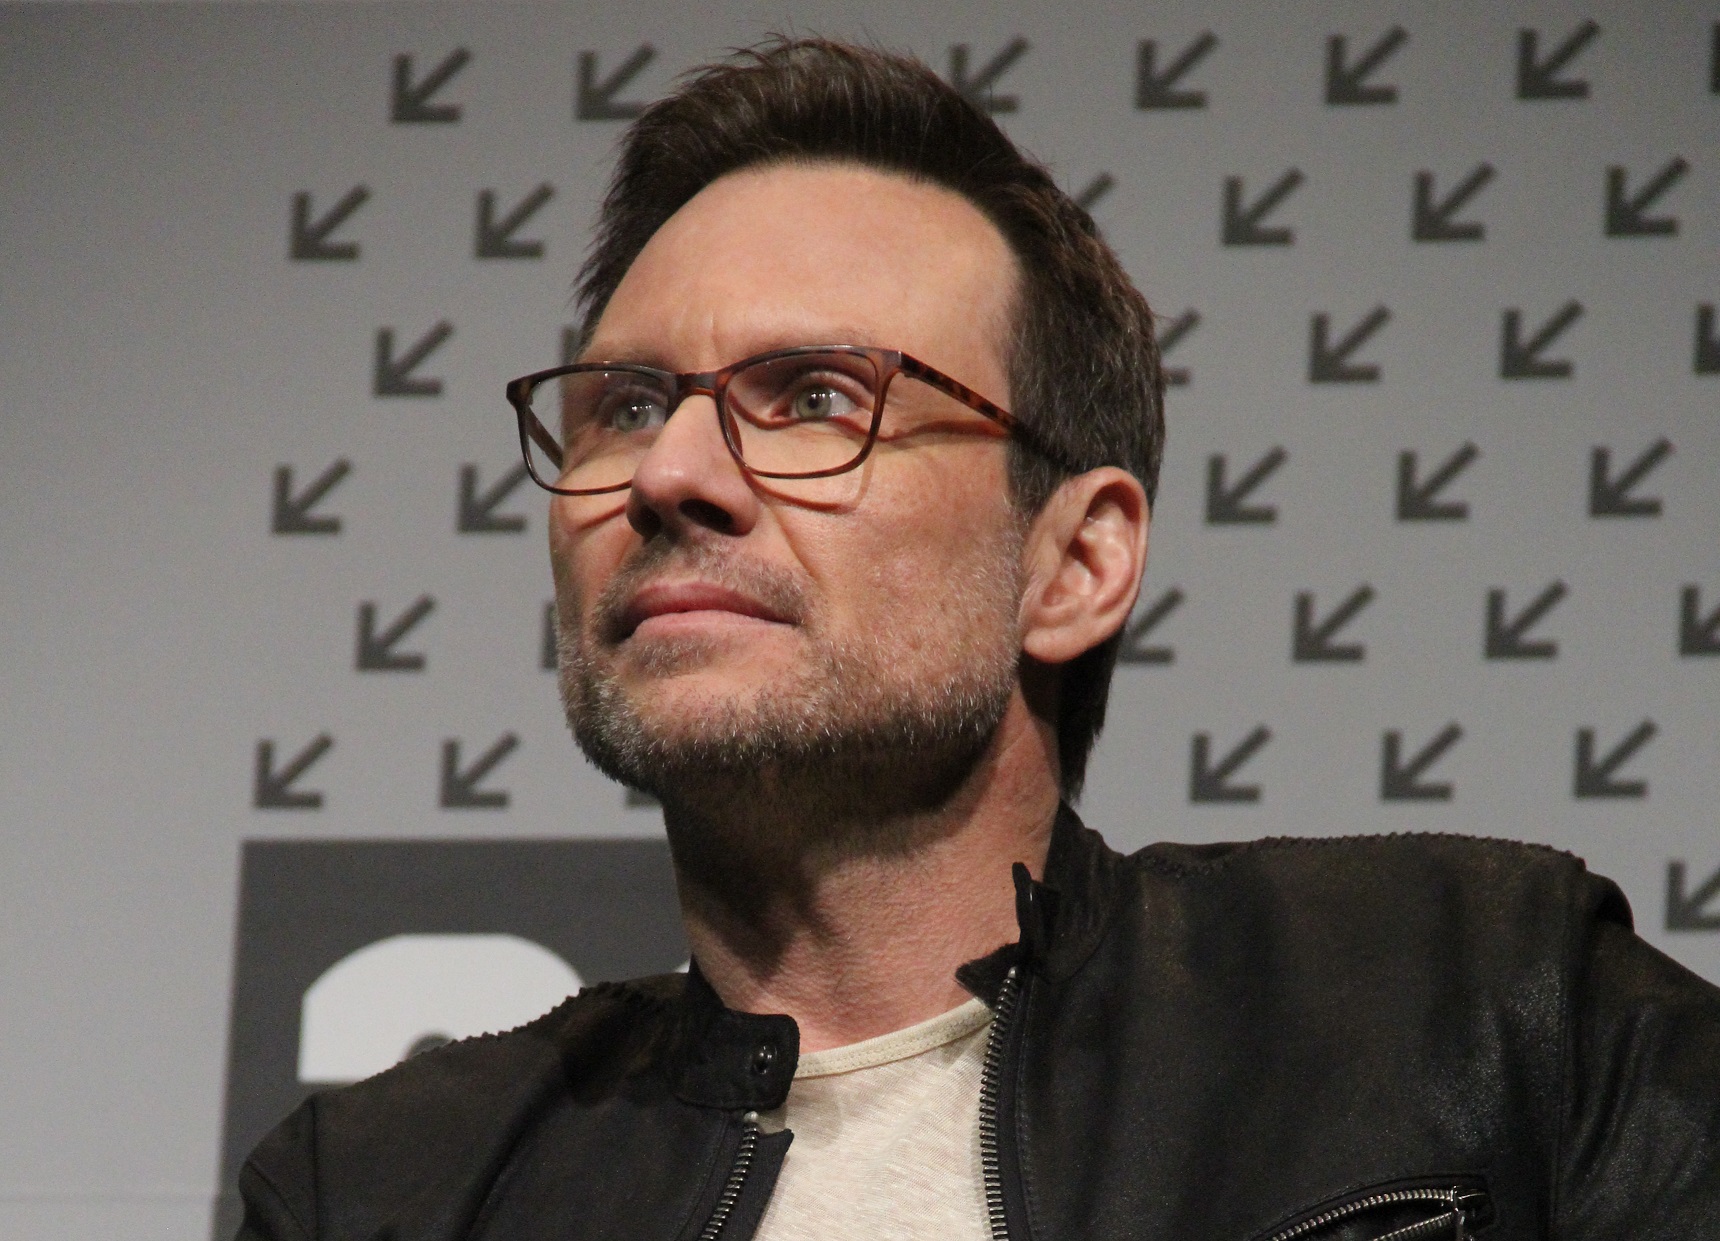 Christian Slater Facts